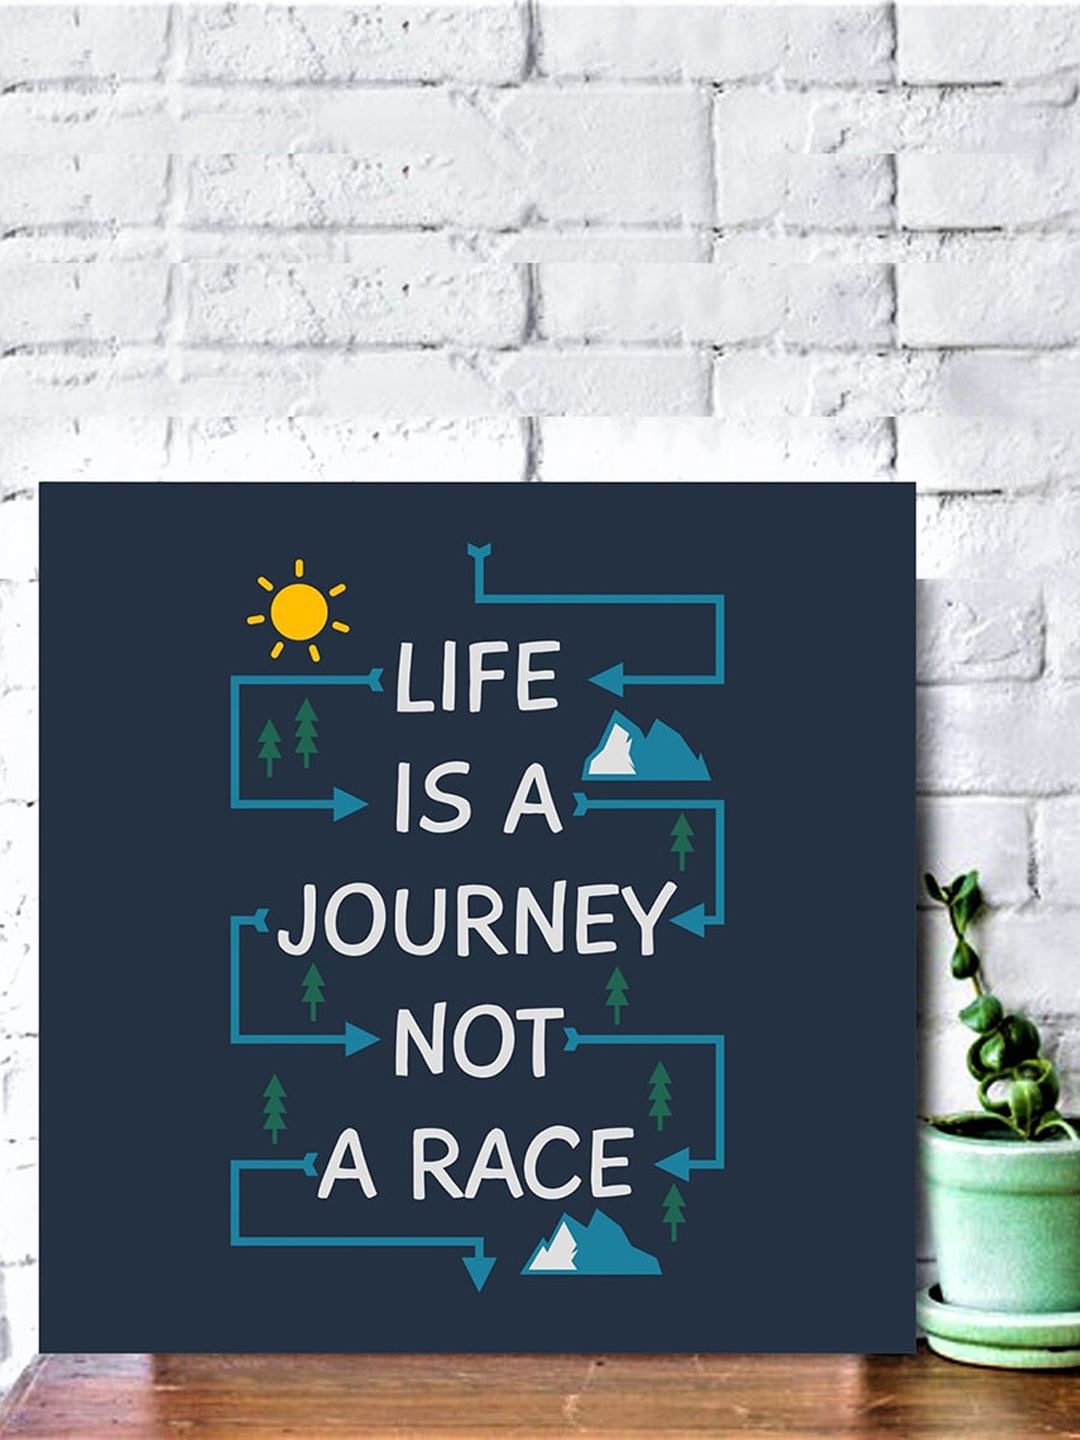 

Gallery99 Blue & White Life Is A Journey Not A Race Wooden Wall Art